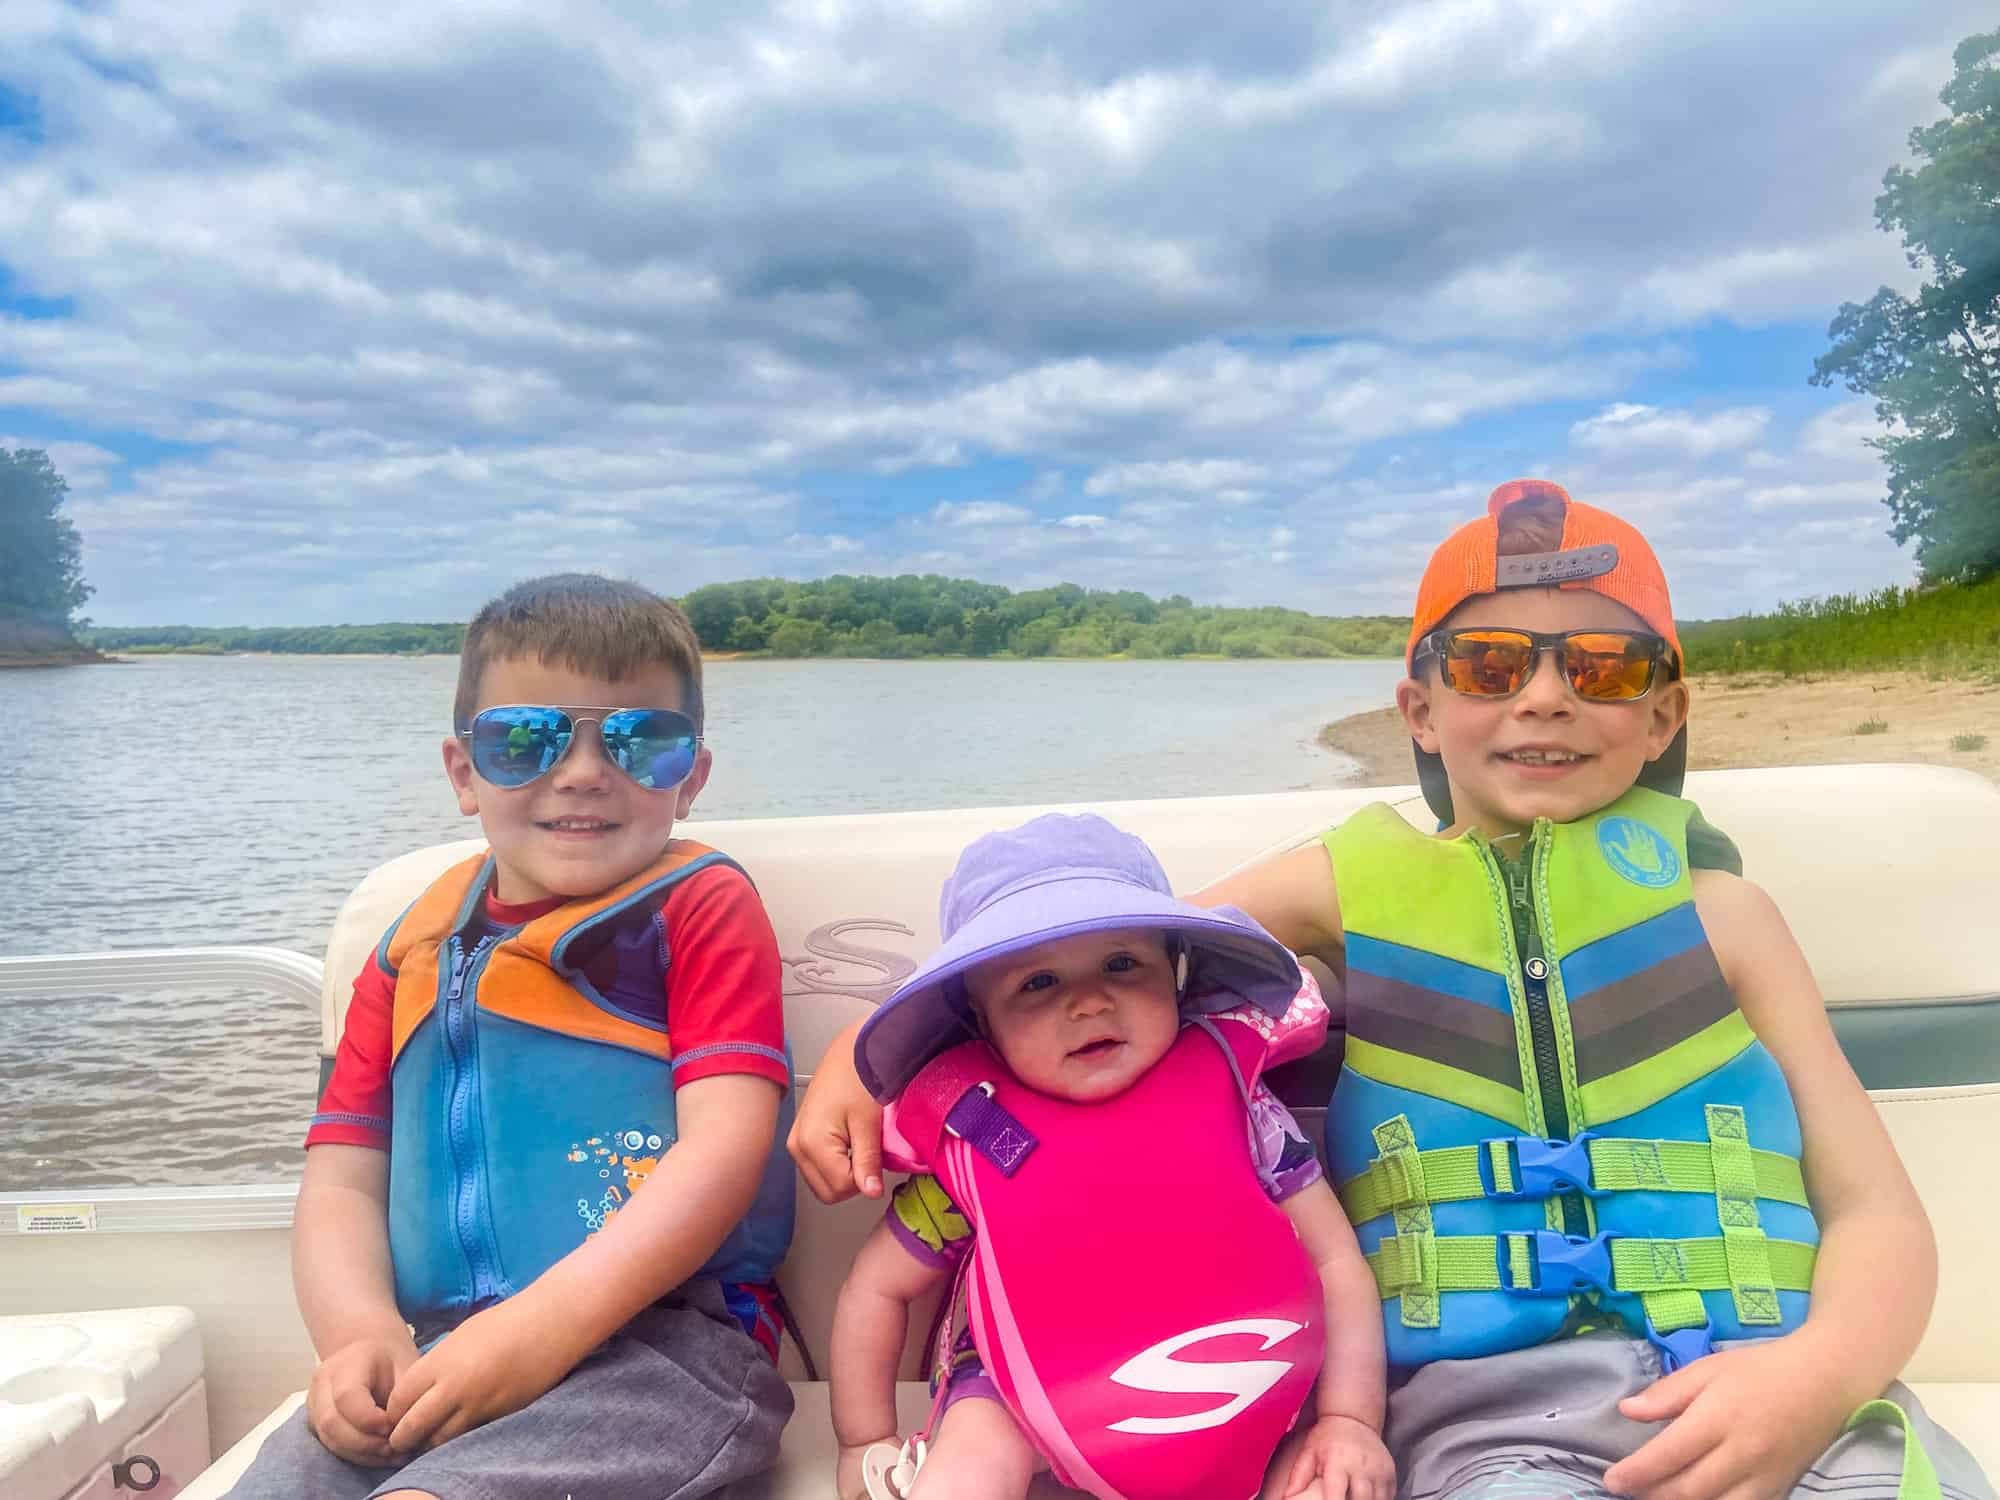 11 Best Life Jackets For Kids (Children Youths) Review, 40% OFF